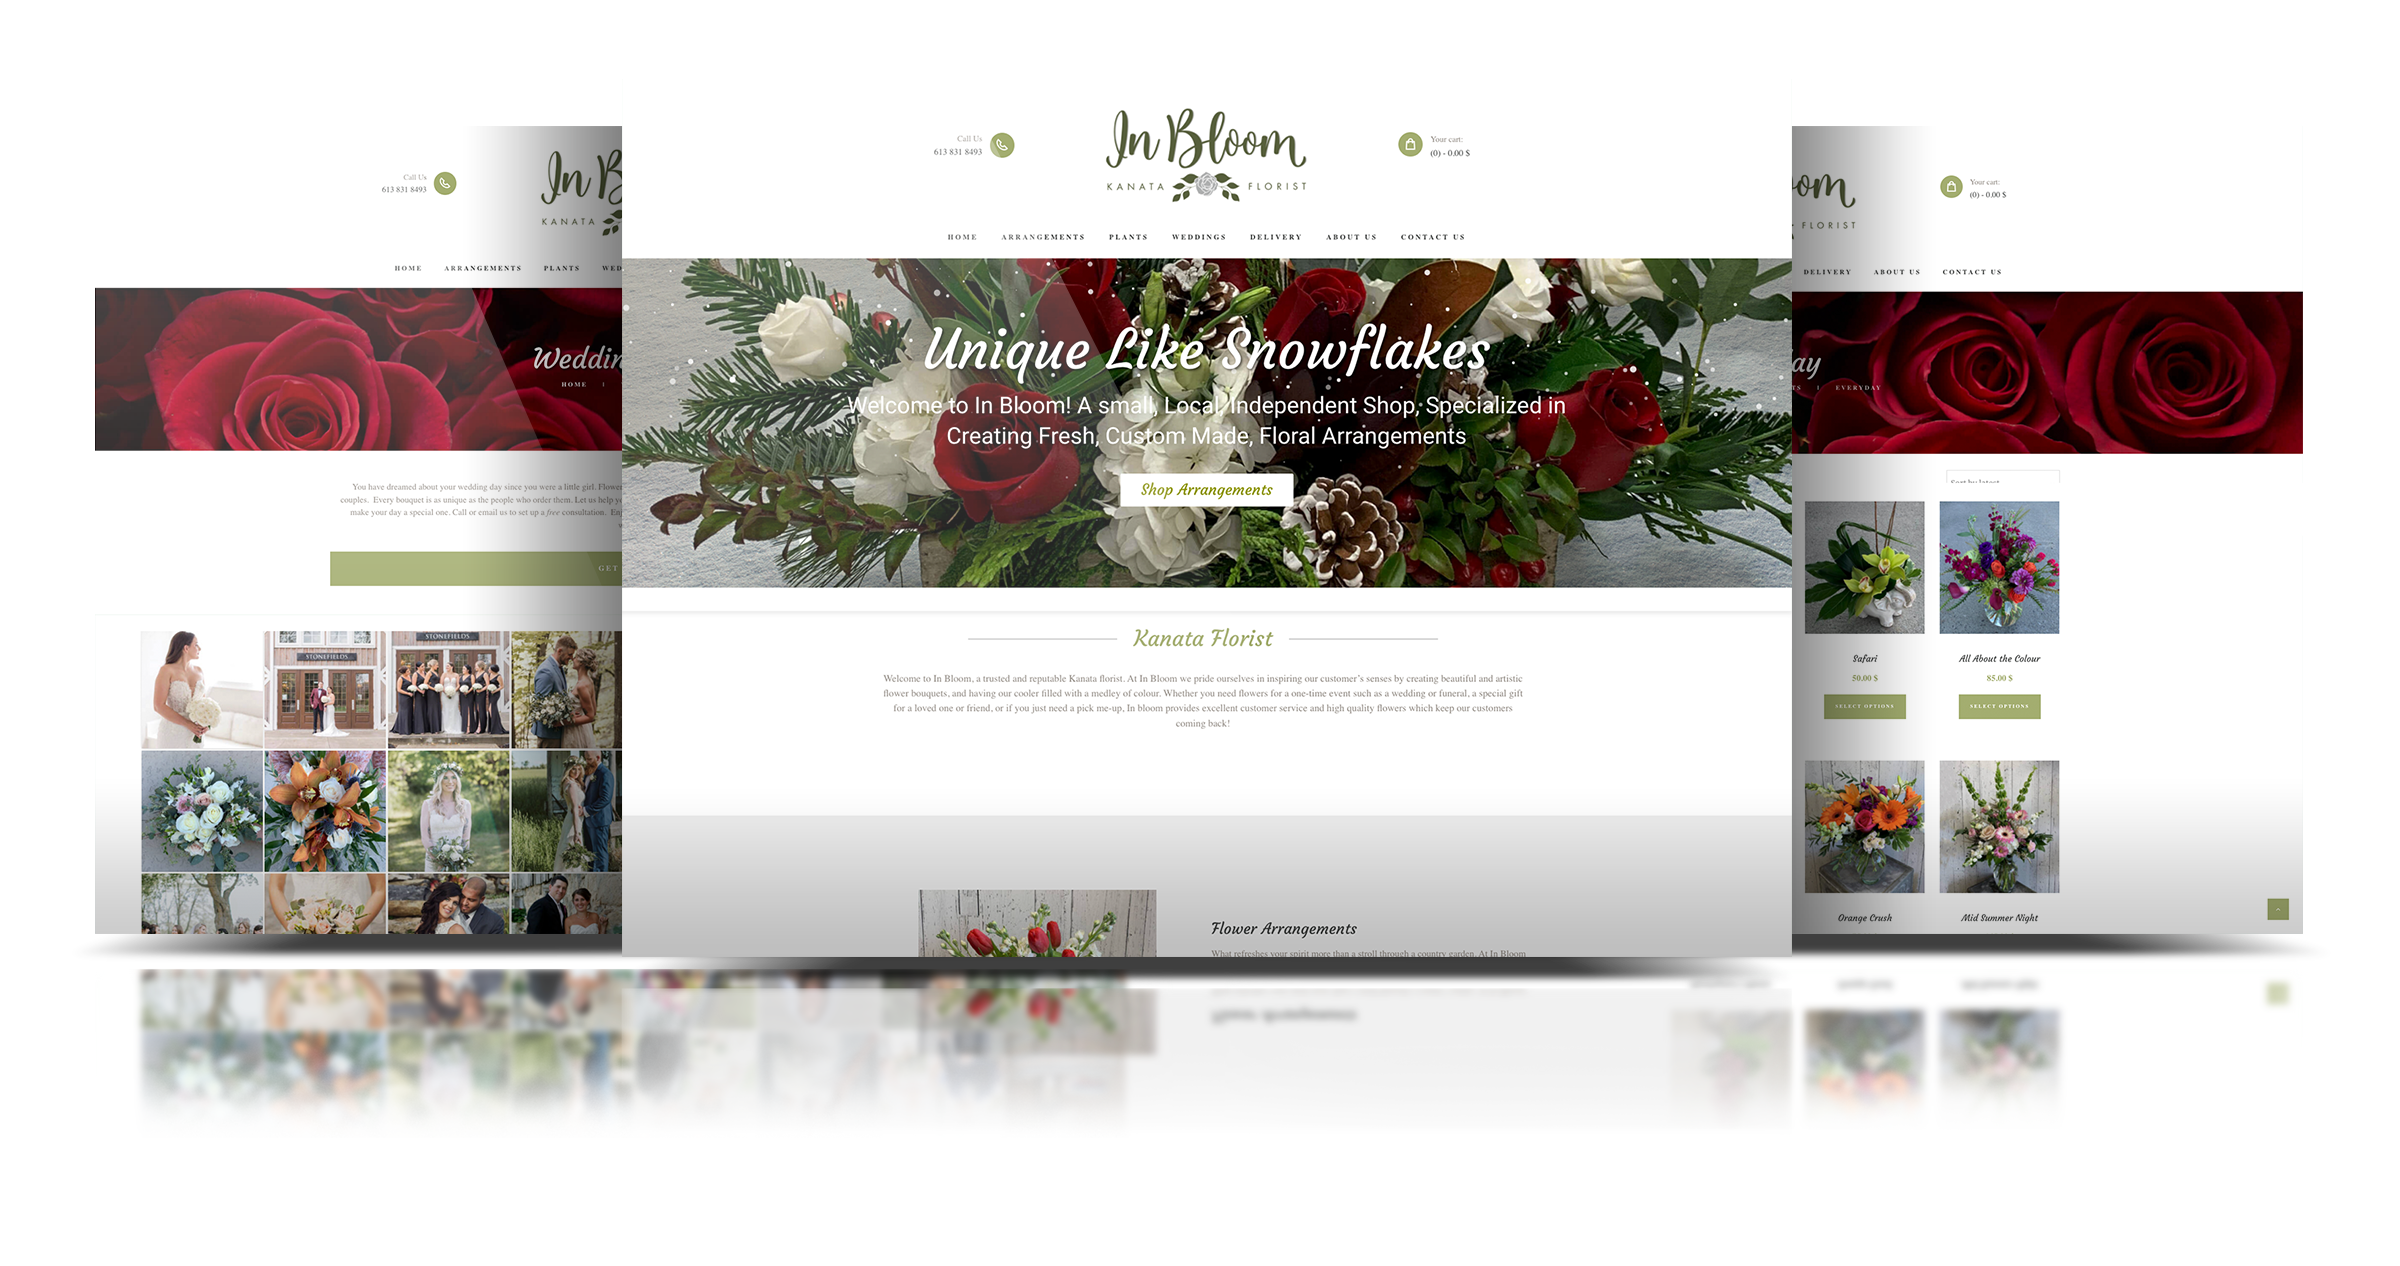 A three tiered website mockup of the In Bloom website